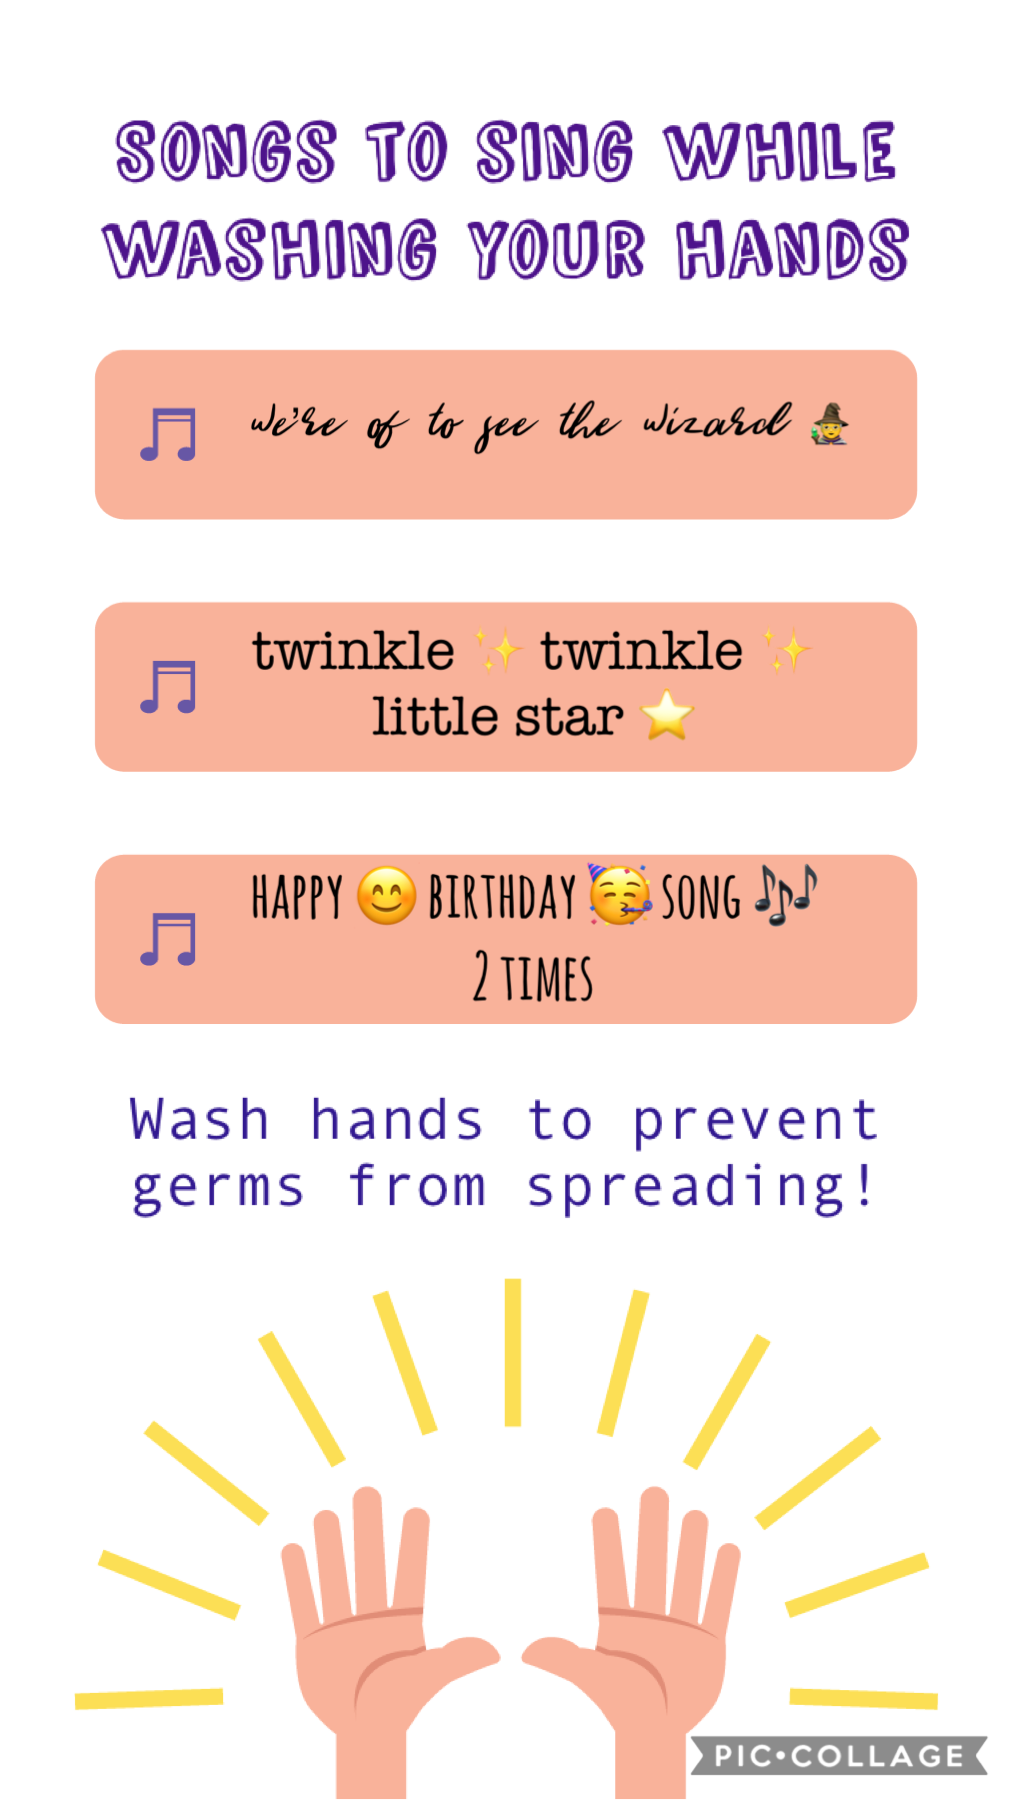 stay safe! wash 🧼 your hands 🙌🏽! here are a few songs to help you with that